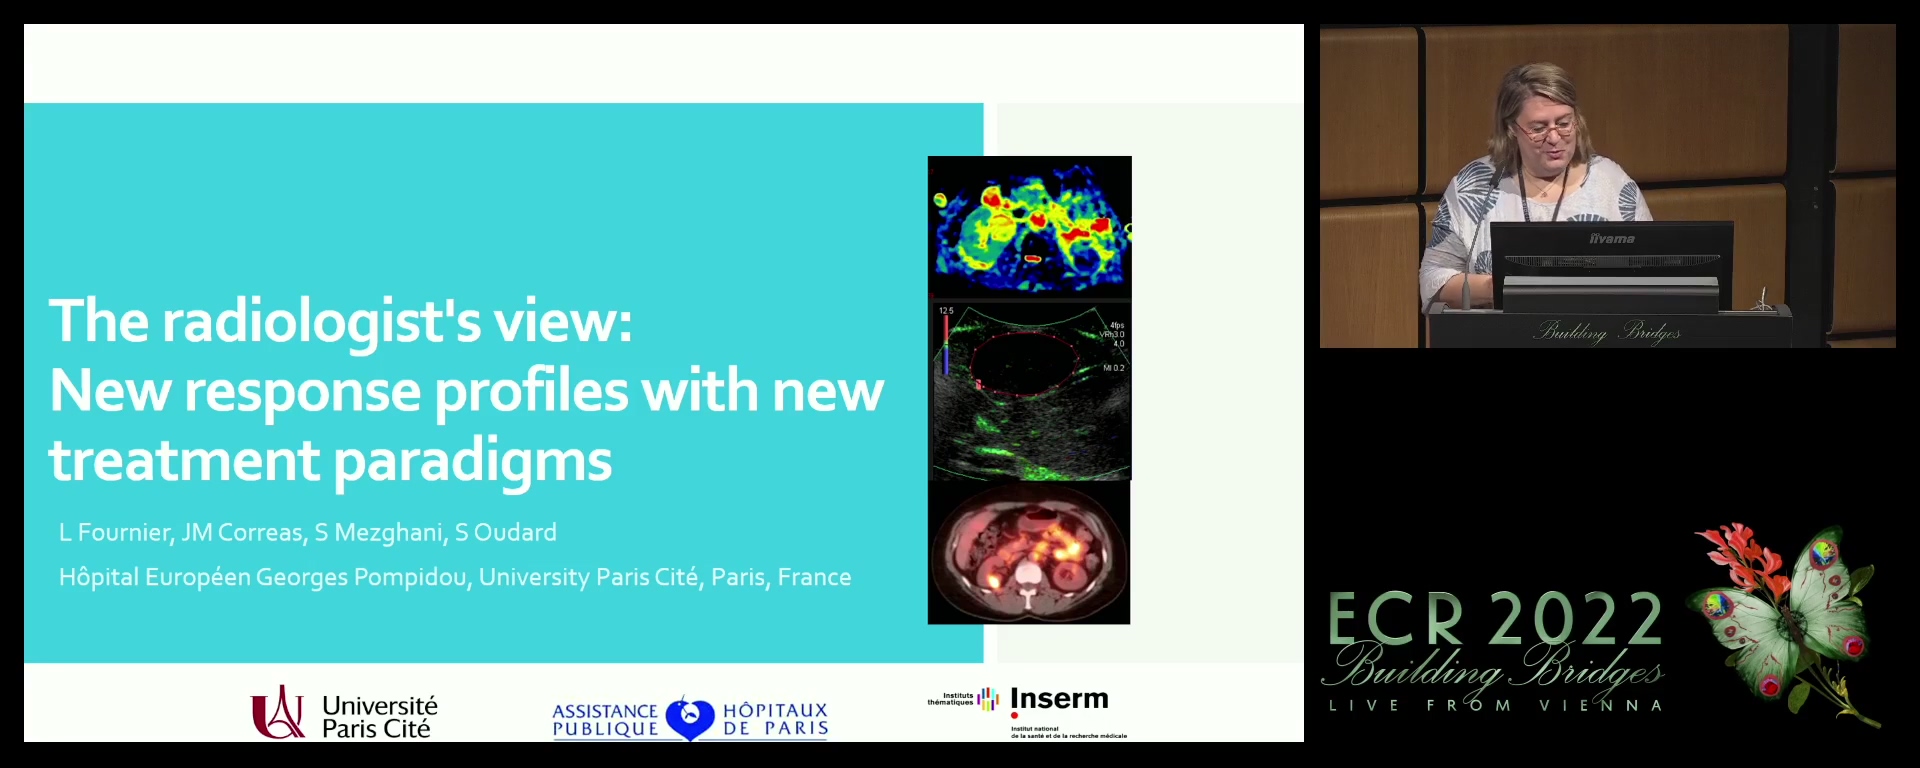 Radiologist: new response profiles with new treatment paradigms - Laure S. Fournier, Paris / FR